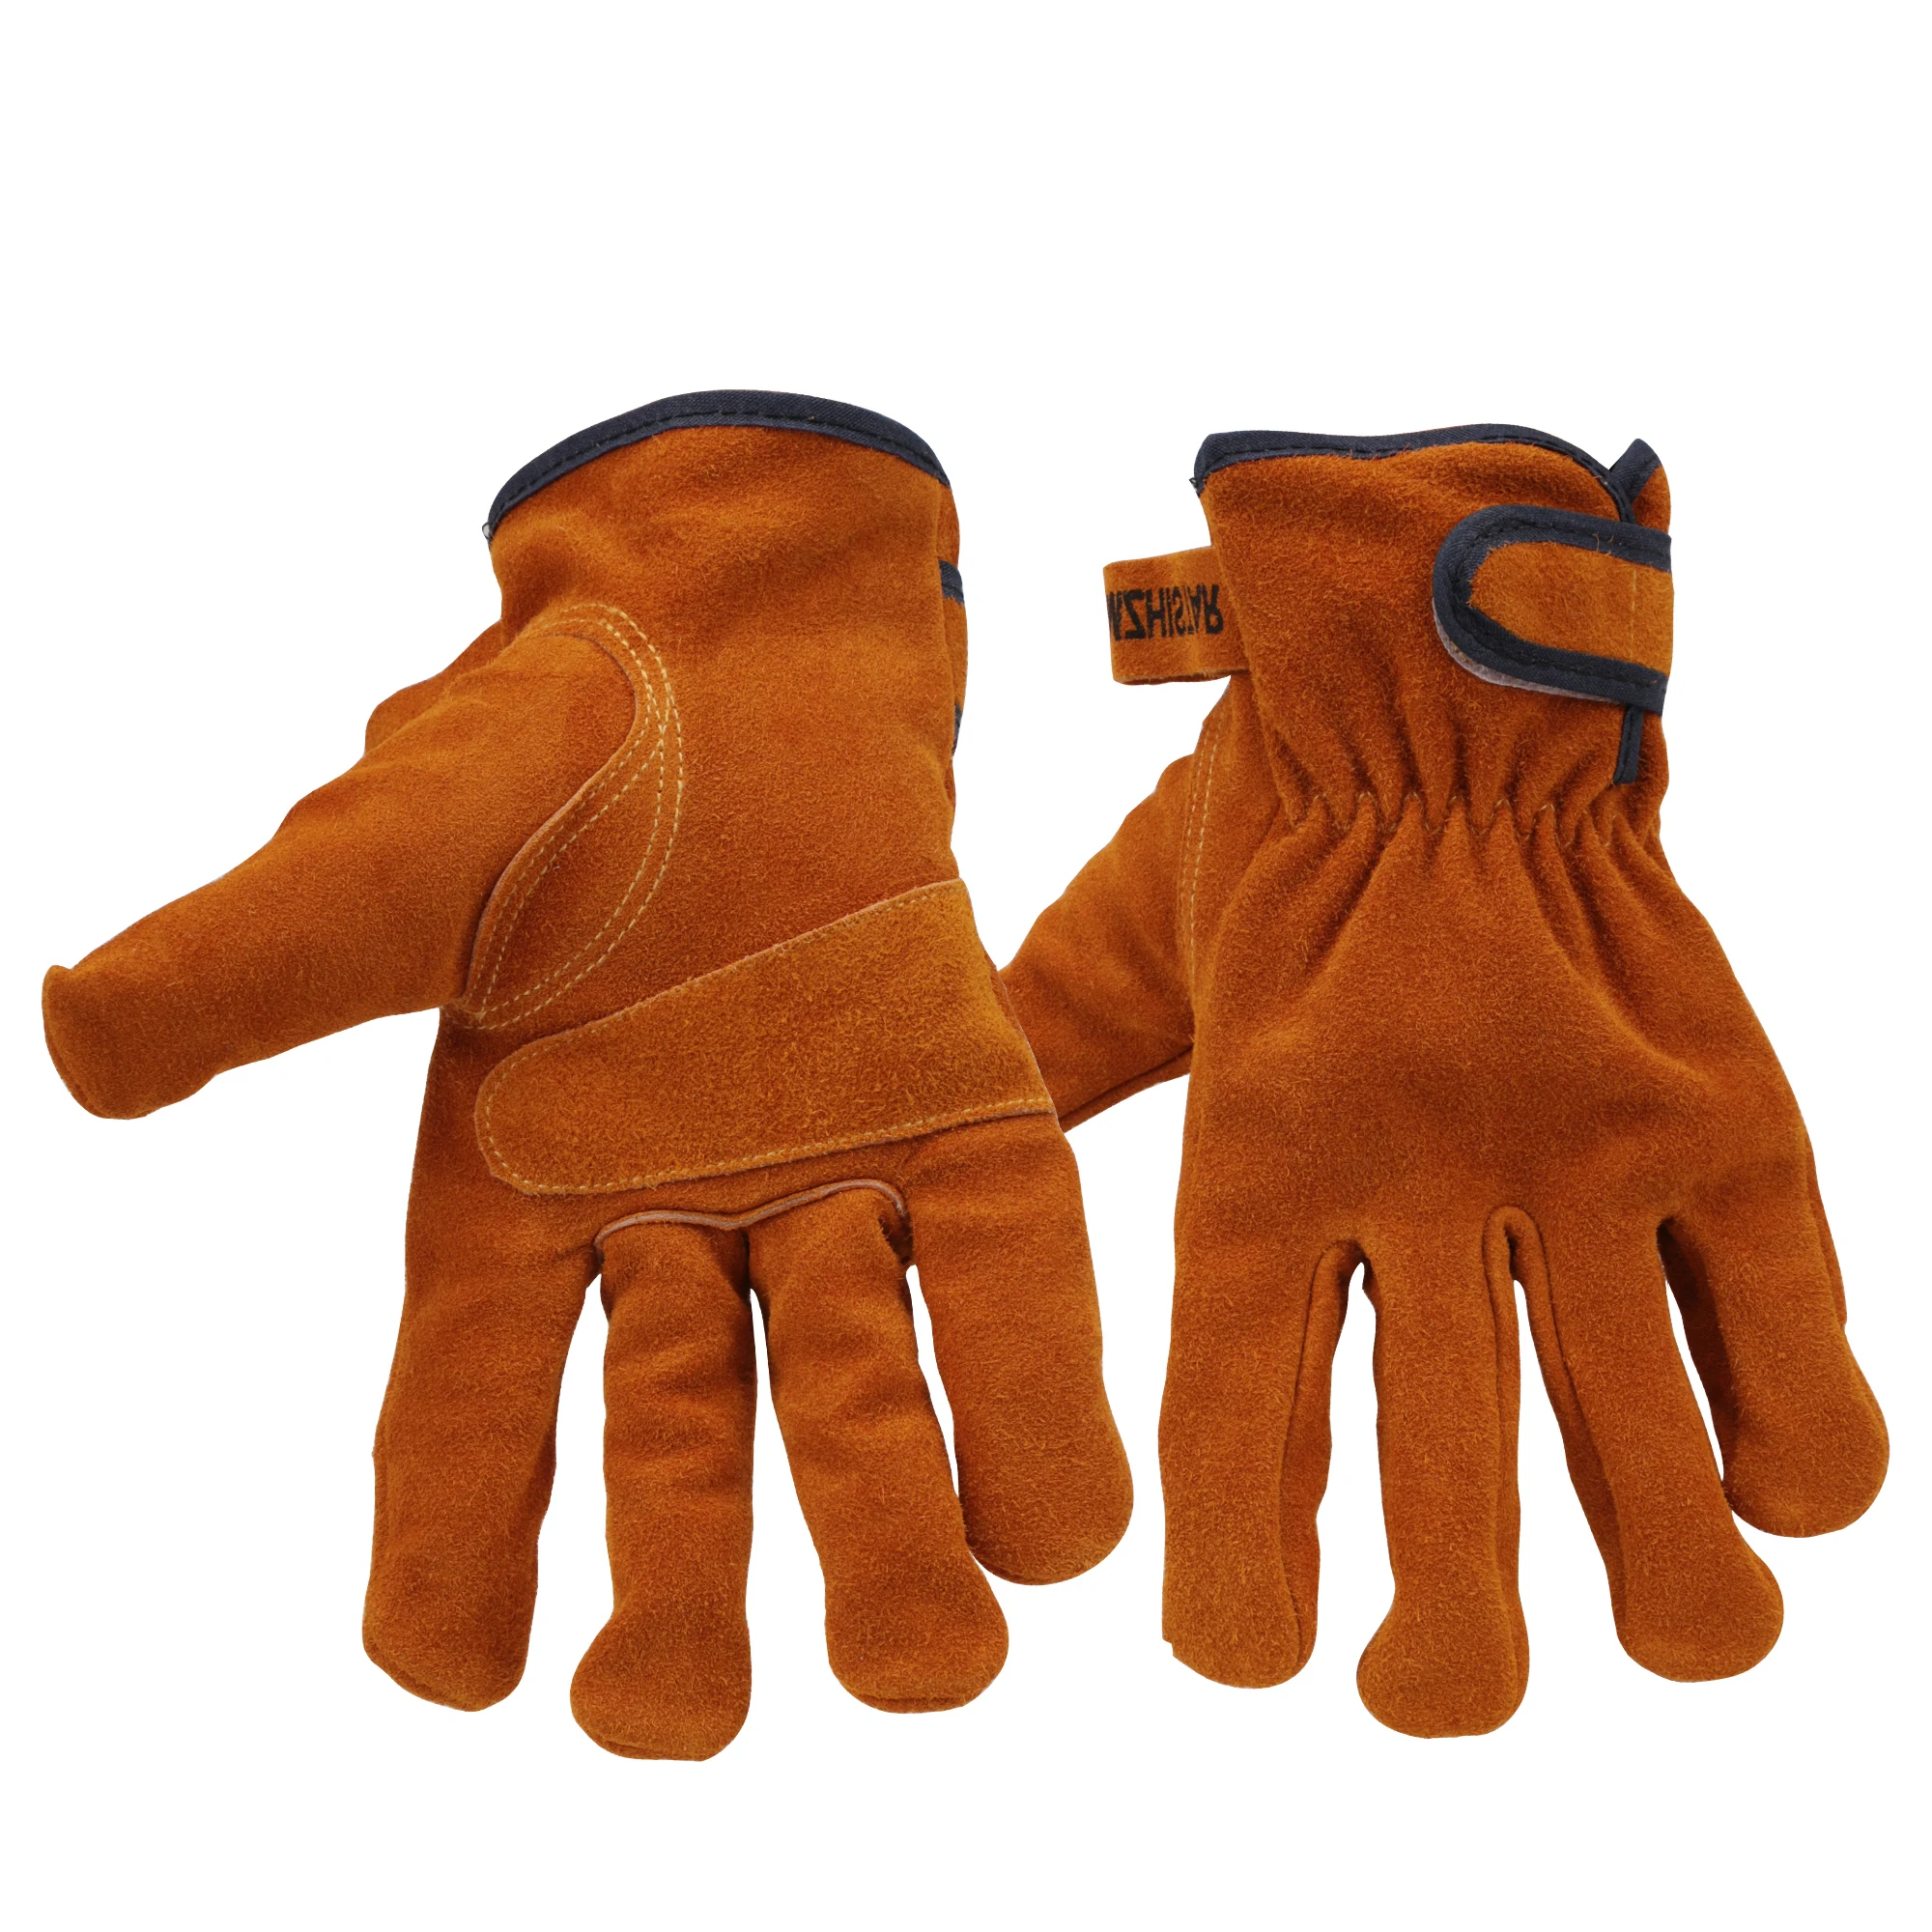 50 Pair Cowhide leather welder's gloves wear-resistant non-slip golden driver gloves insulated labor protection welding glove light colored denim knife gloves a layer of light colored leather welding protective insulation wear labor protection